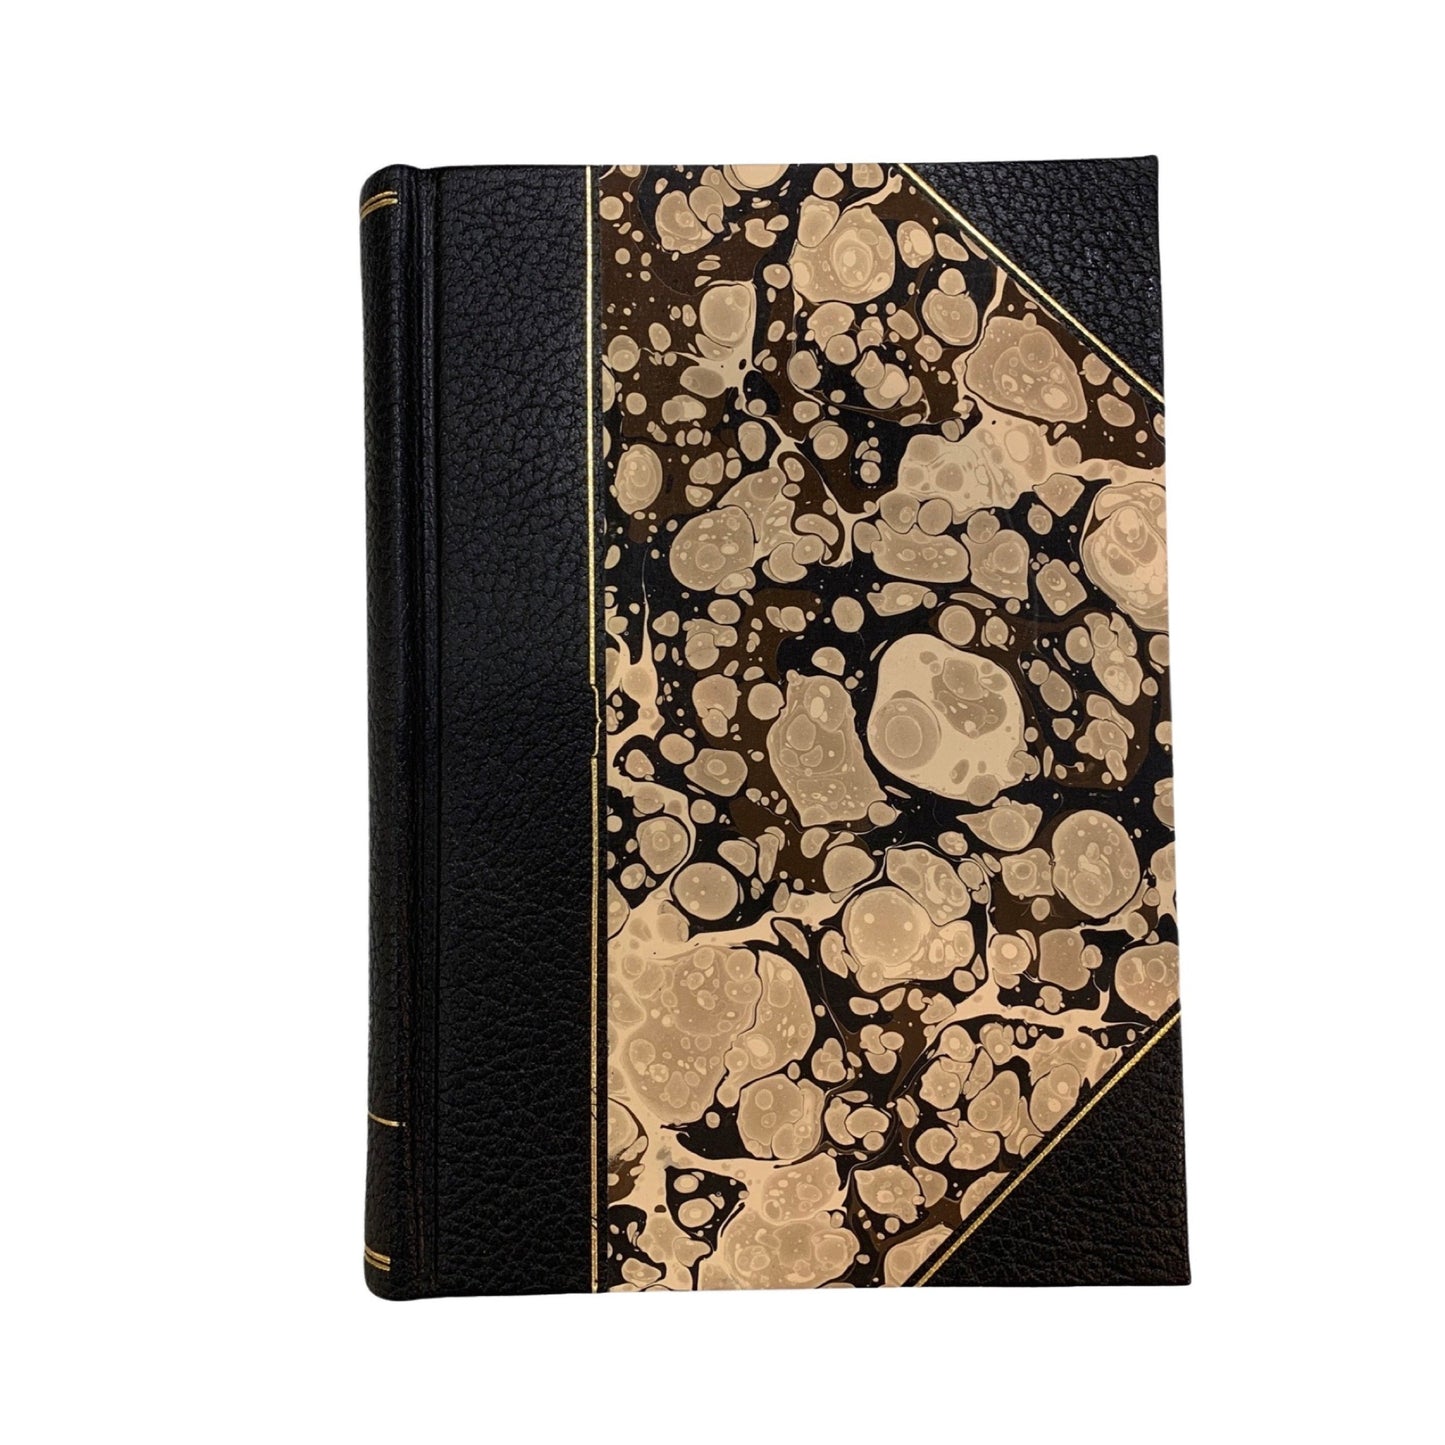 Dr. Monah | Bespoke Desk Diary, Journal, Writing Instrument | 8 x 6" | One Day Per Page | D186S